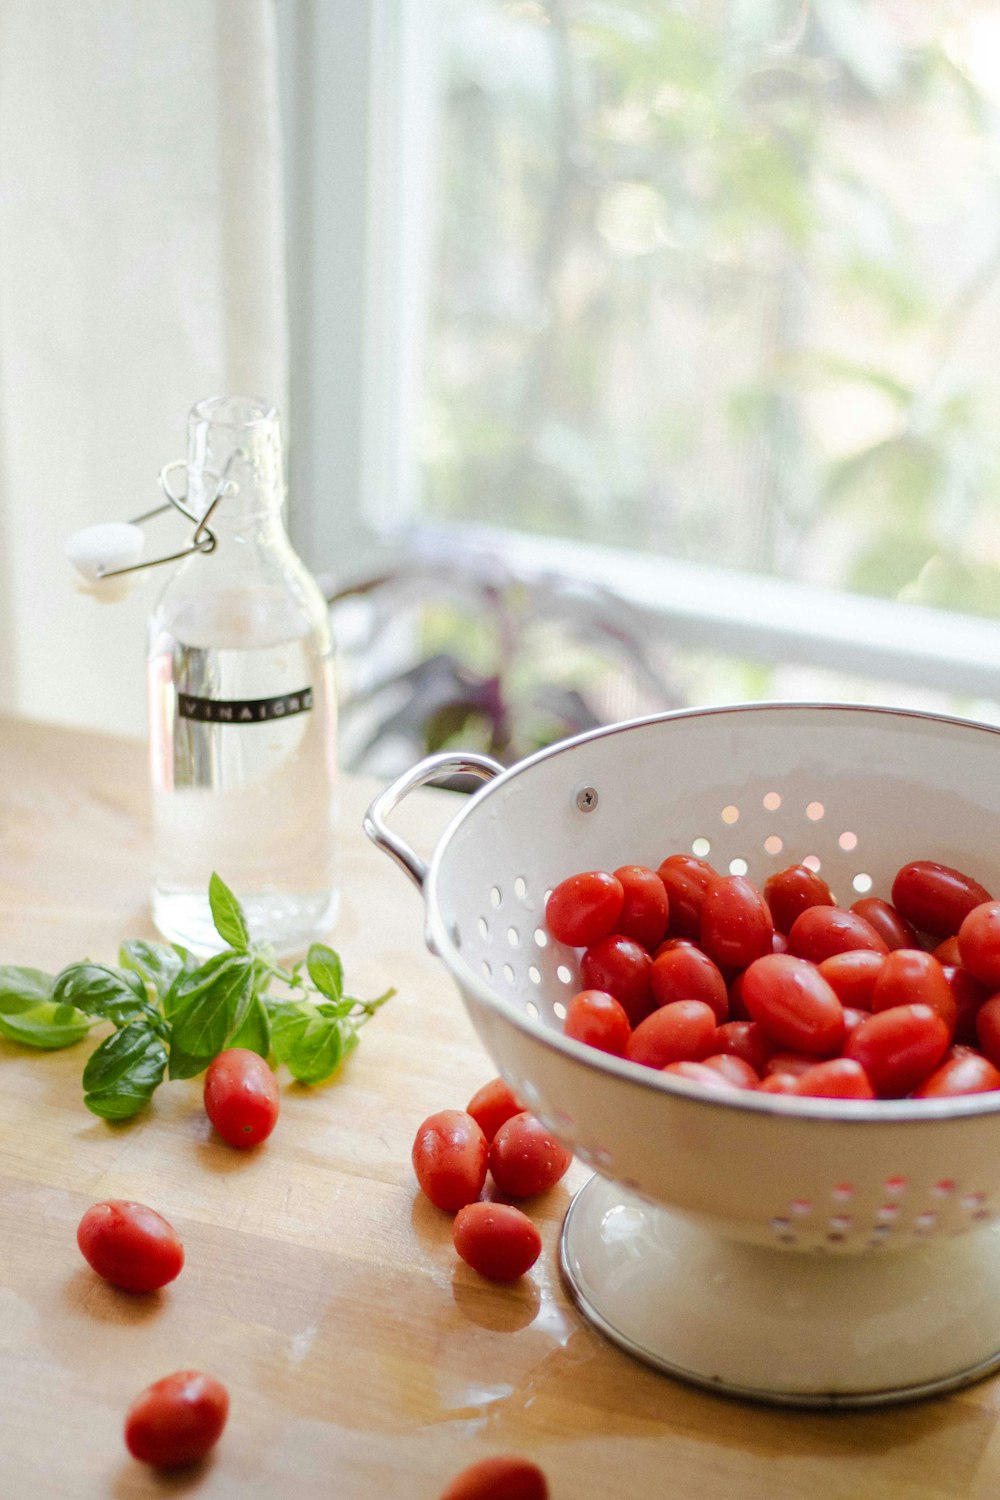 red tomatoes in round white strainer near green mint and glass bottle on table